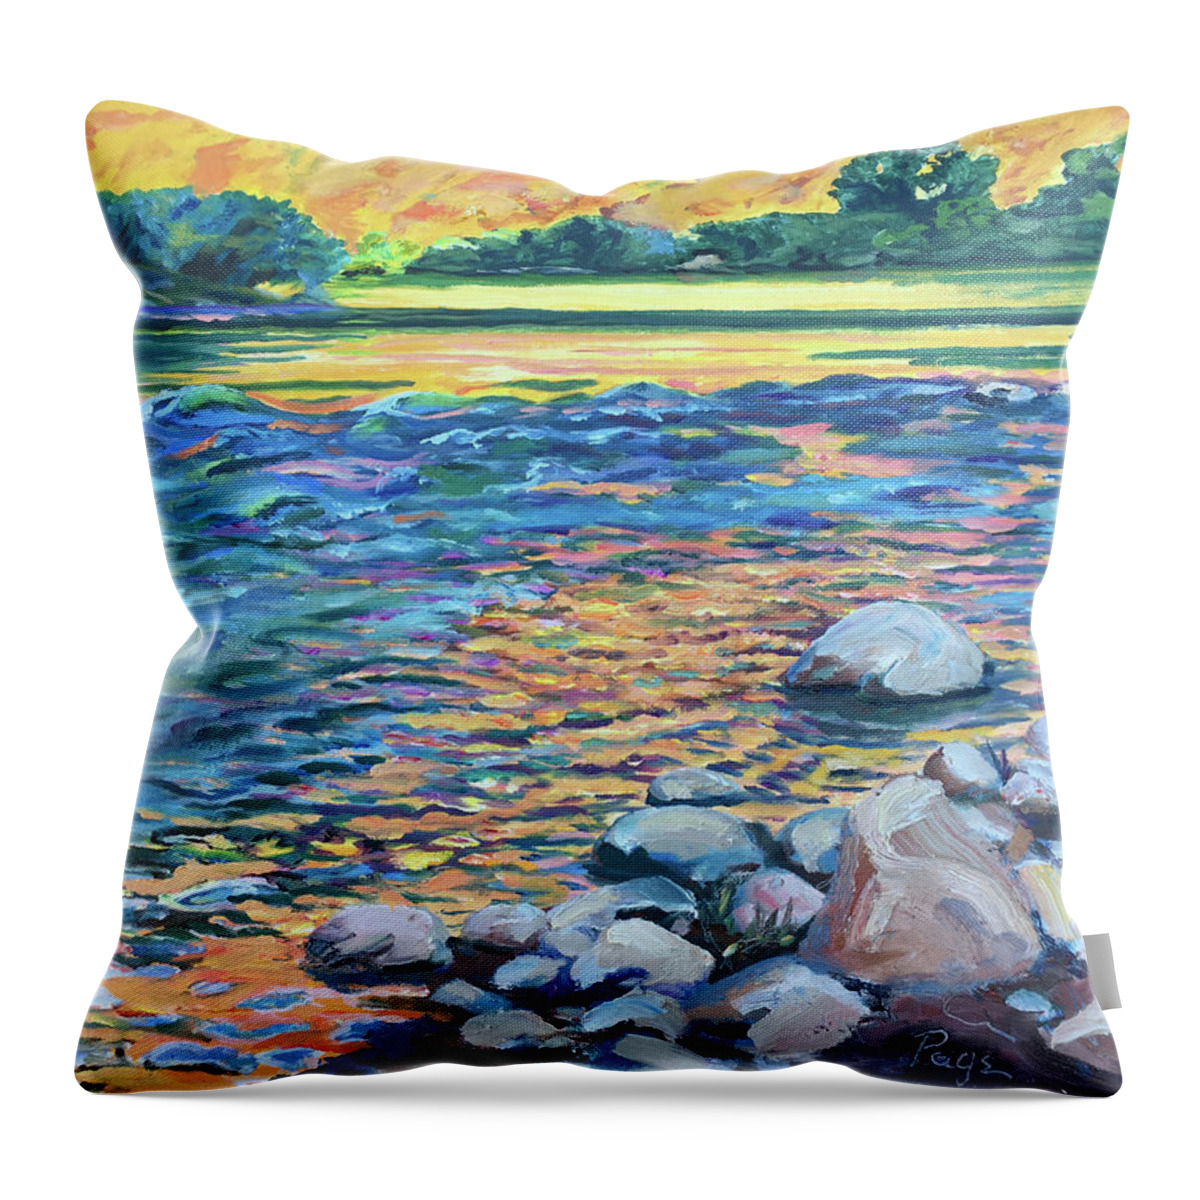 Oil Painting Throw Pillow featuring the painting Golden Morning, Big Bend by Page Holland